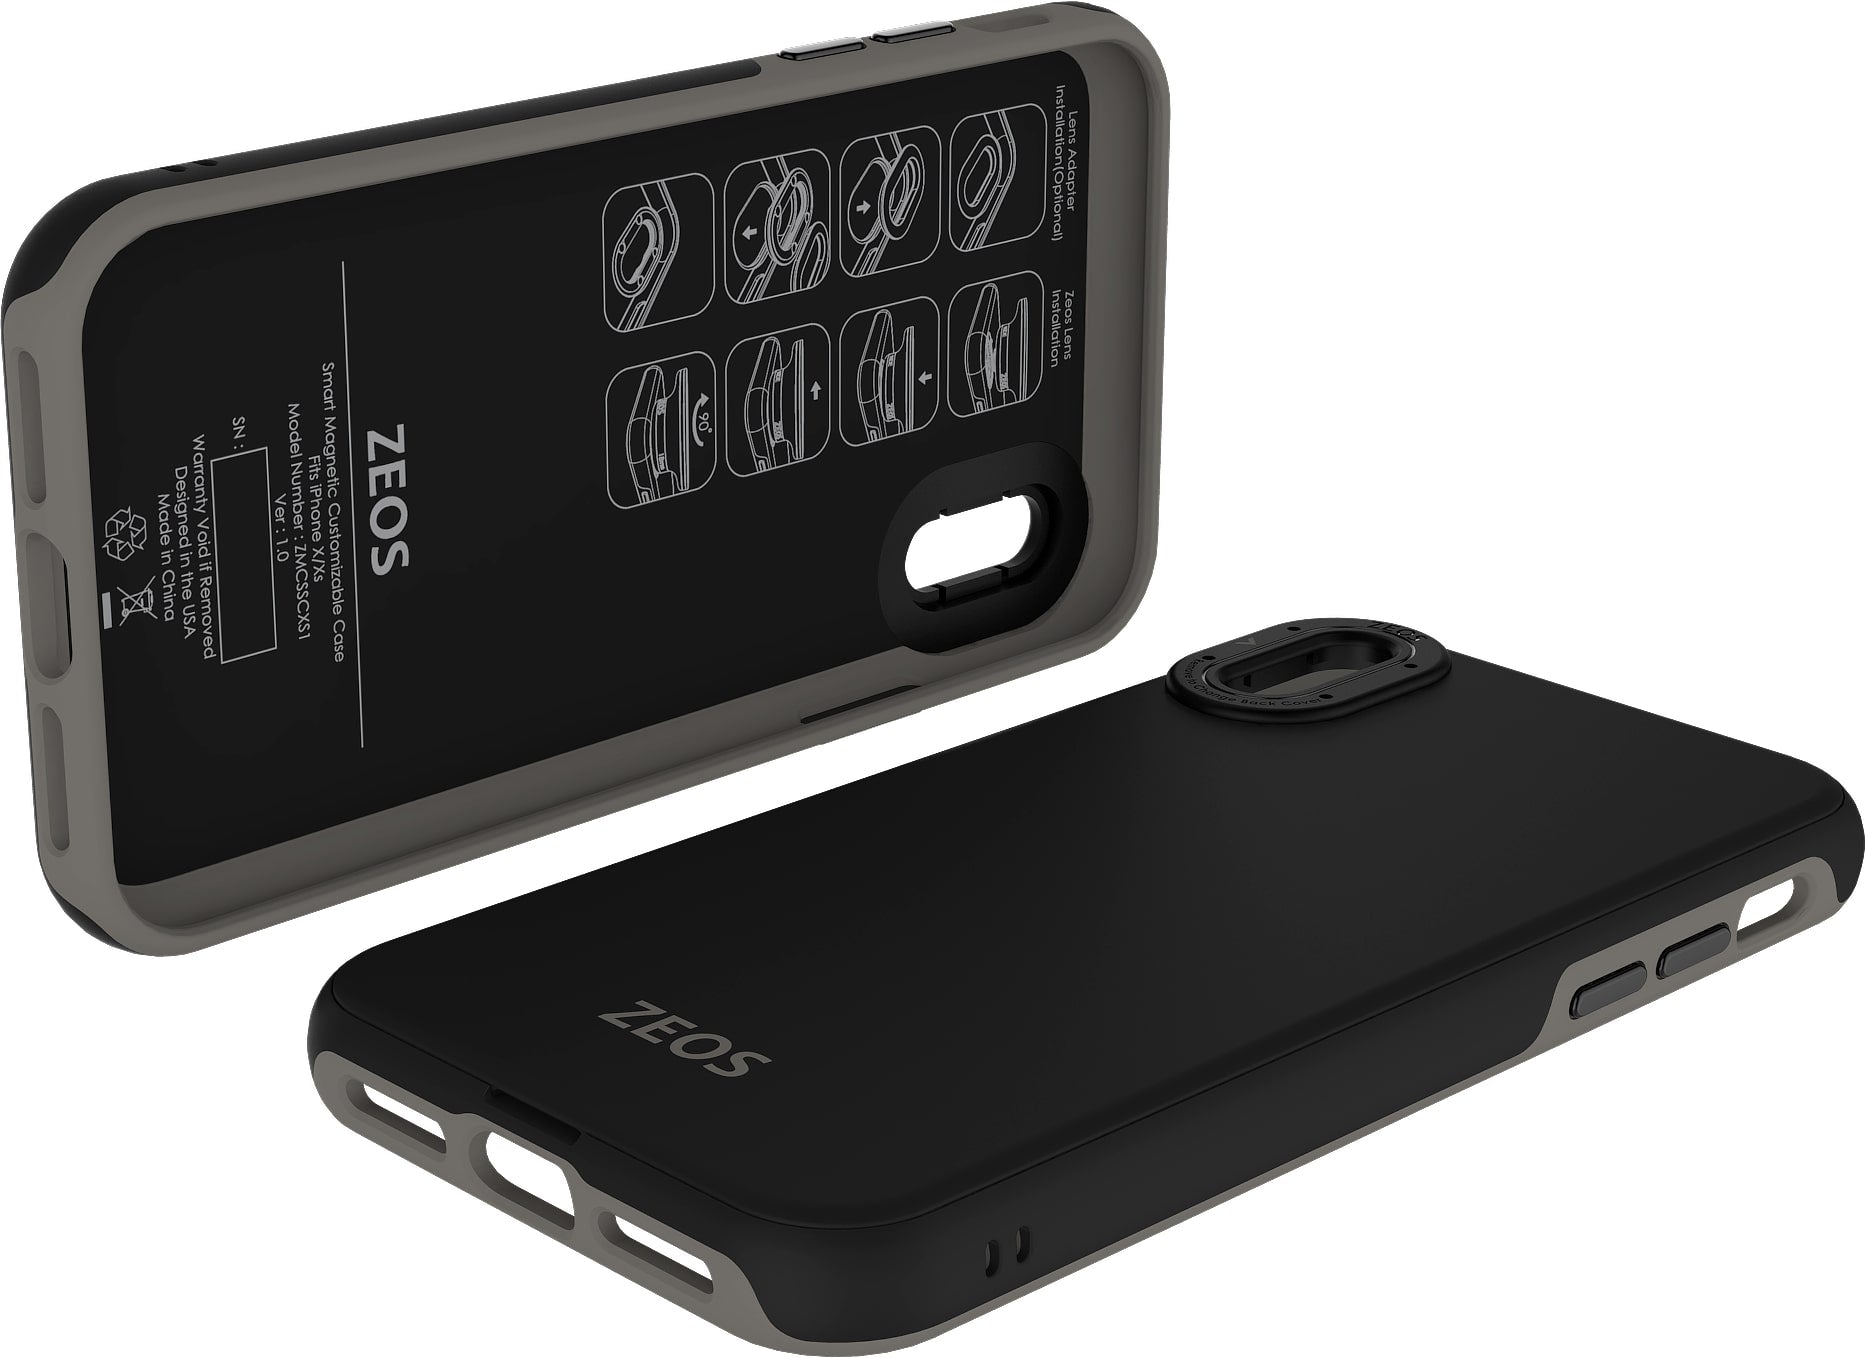 ZEOS 3 in 1 Battery Case for iPhone 7